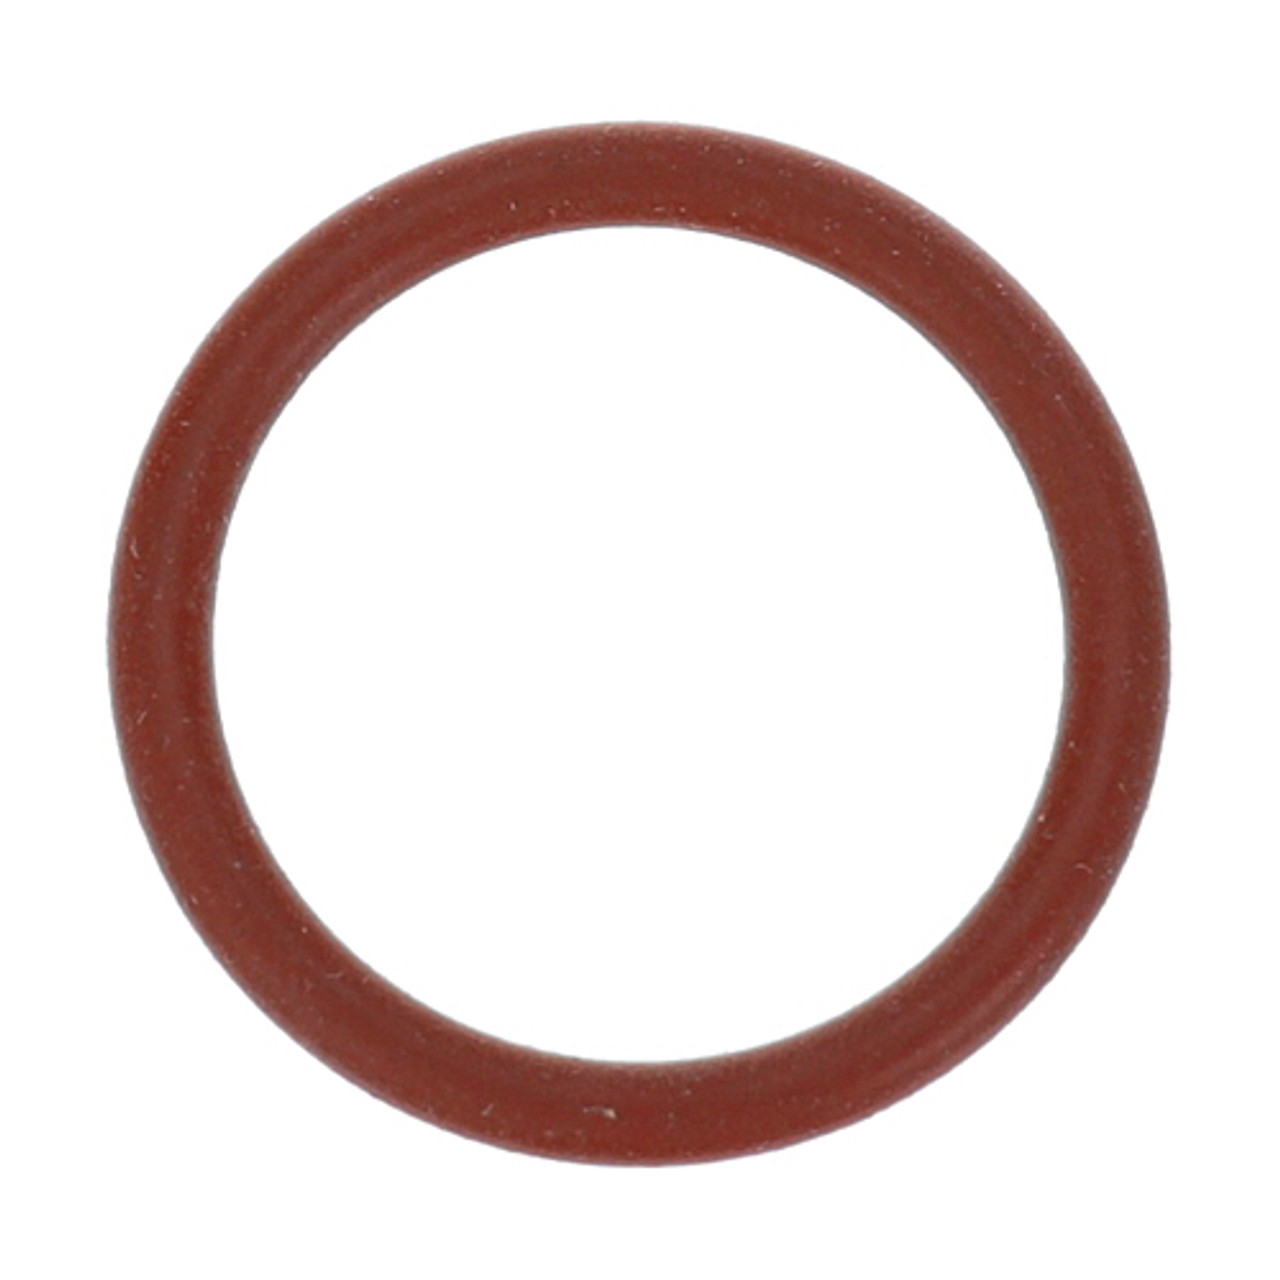 O-Ring 13/16" X 3/32" Width - Replacement Part For Jackson 5330-002-60-69